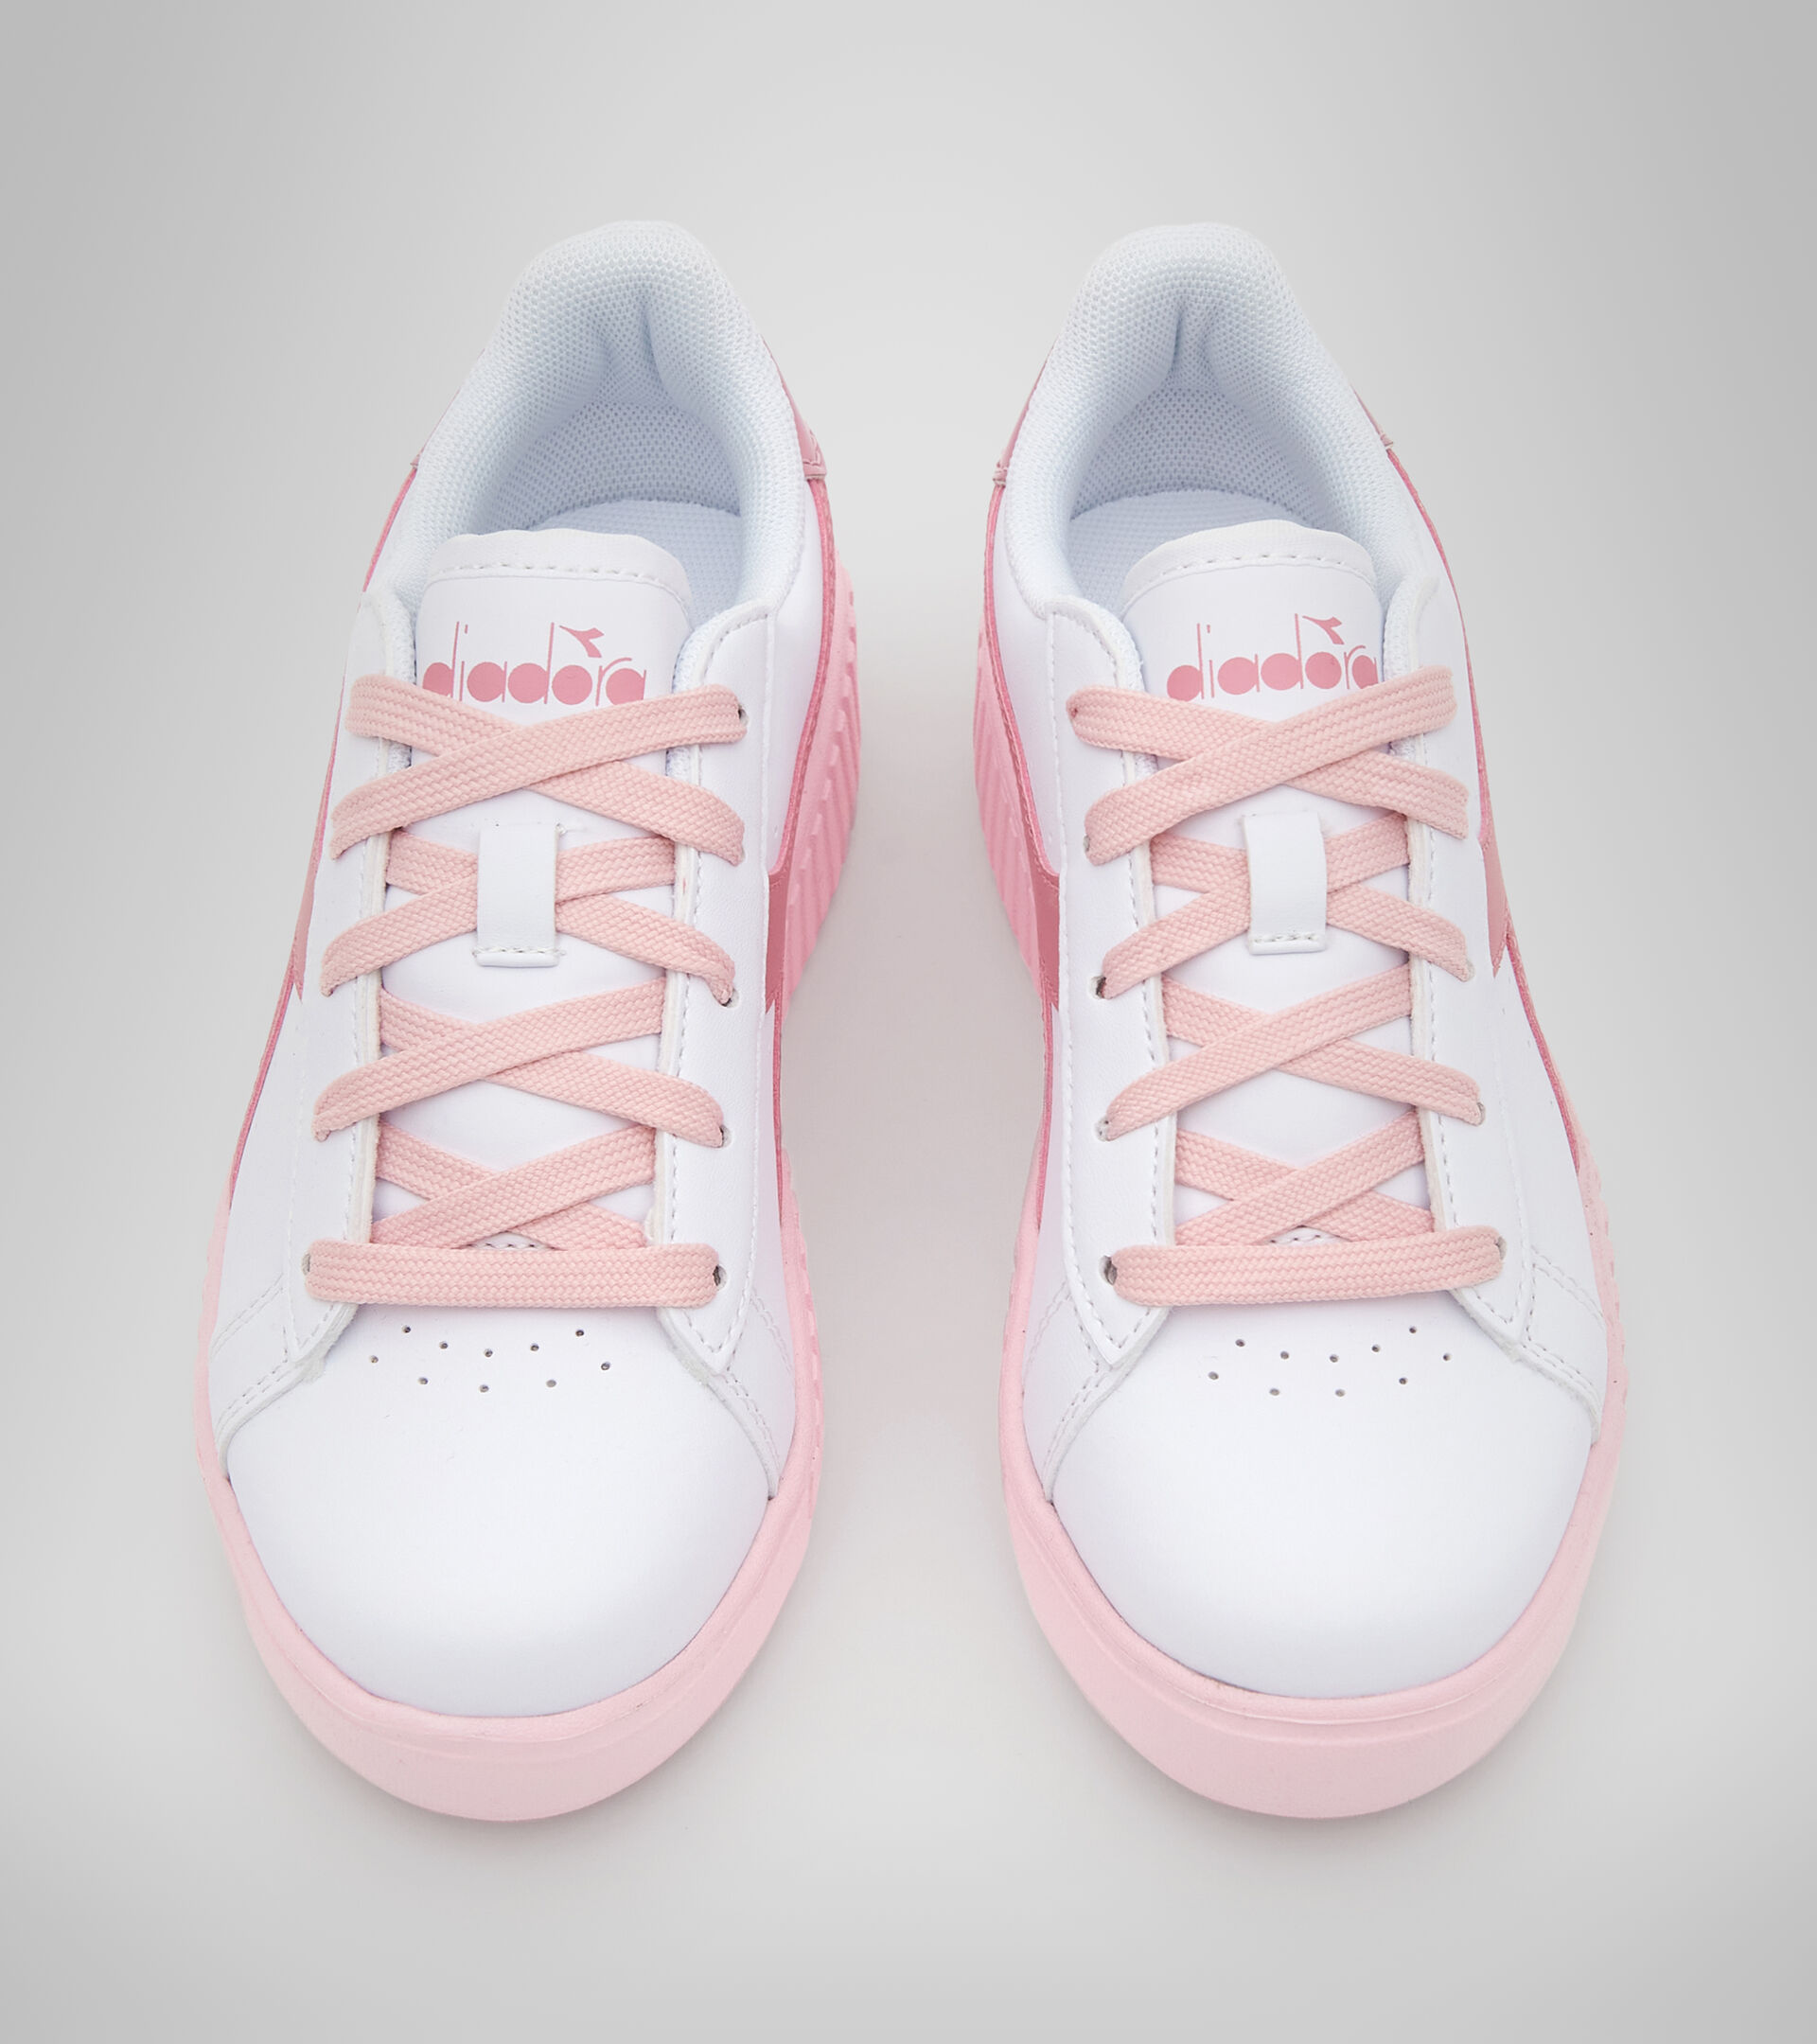 Sports shoes - Kids 4-8 years GAME STEP PS WHITE/SWEET PINK - Diadora